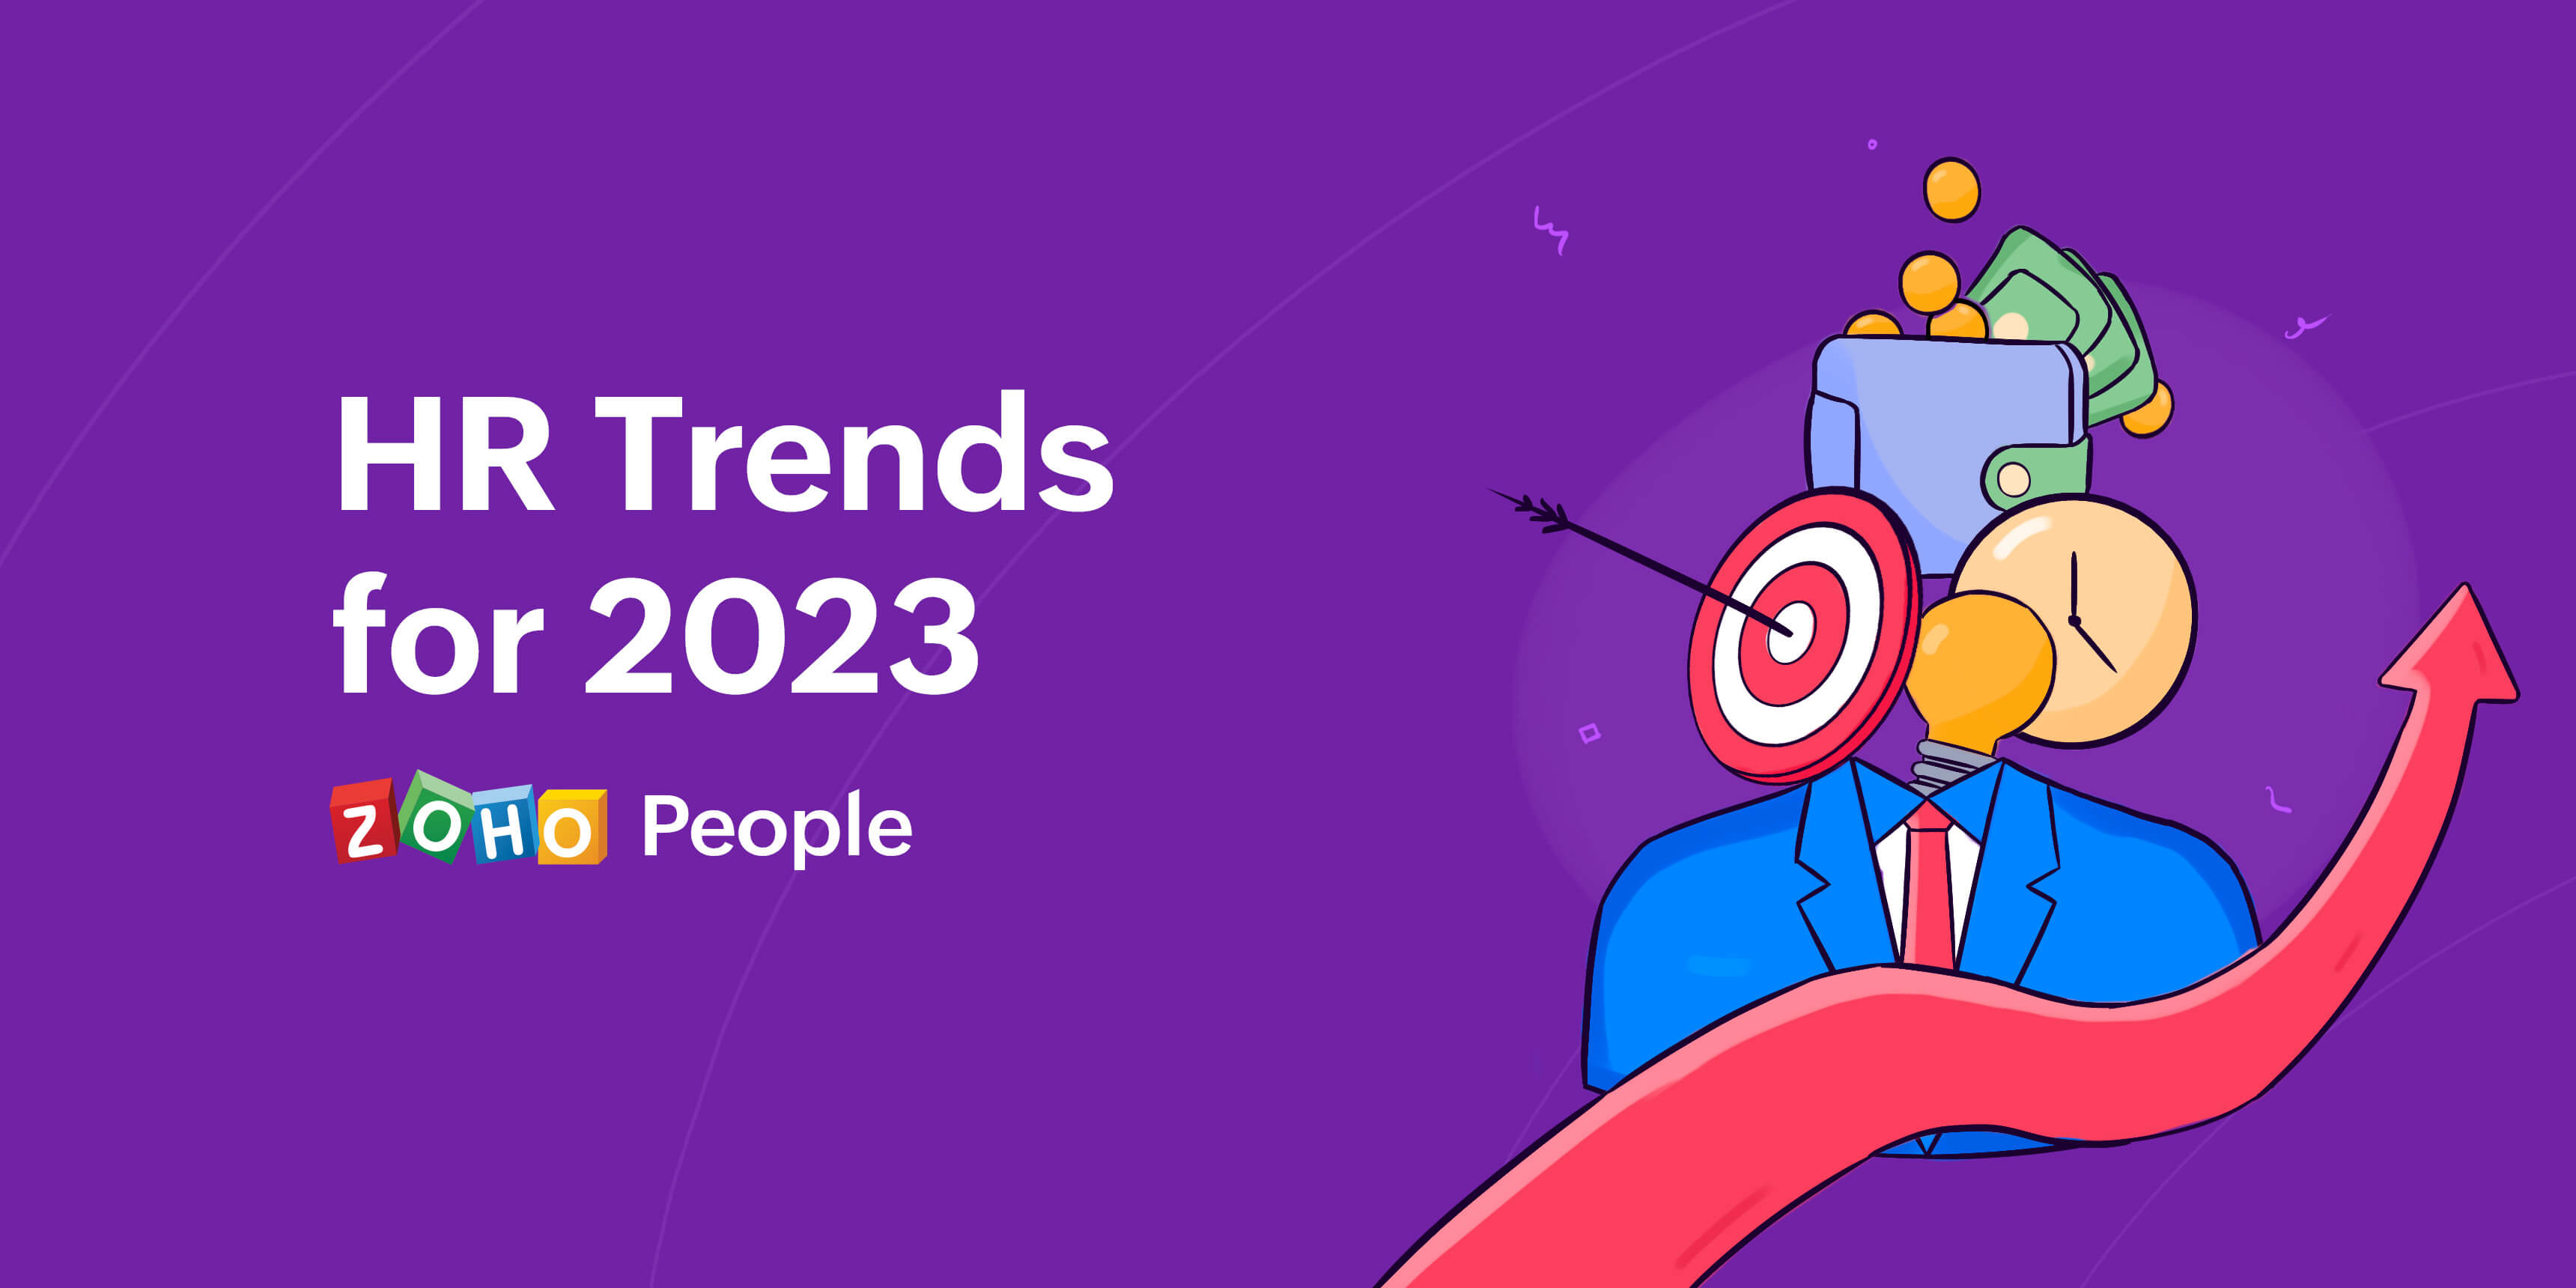 Top 6 workplace trends that'll matter for HR professionals in 2023 HR